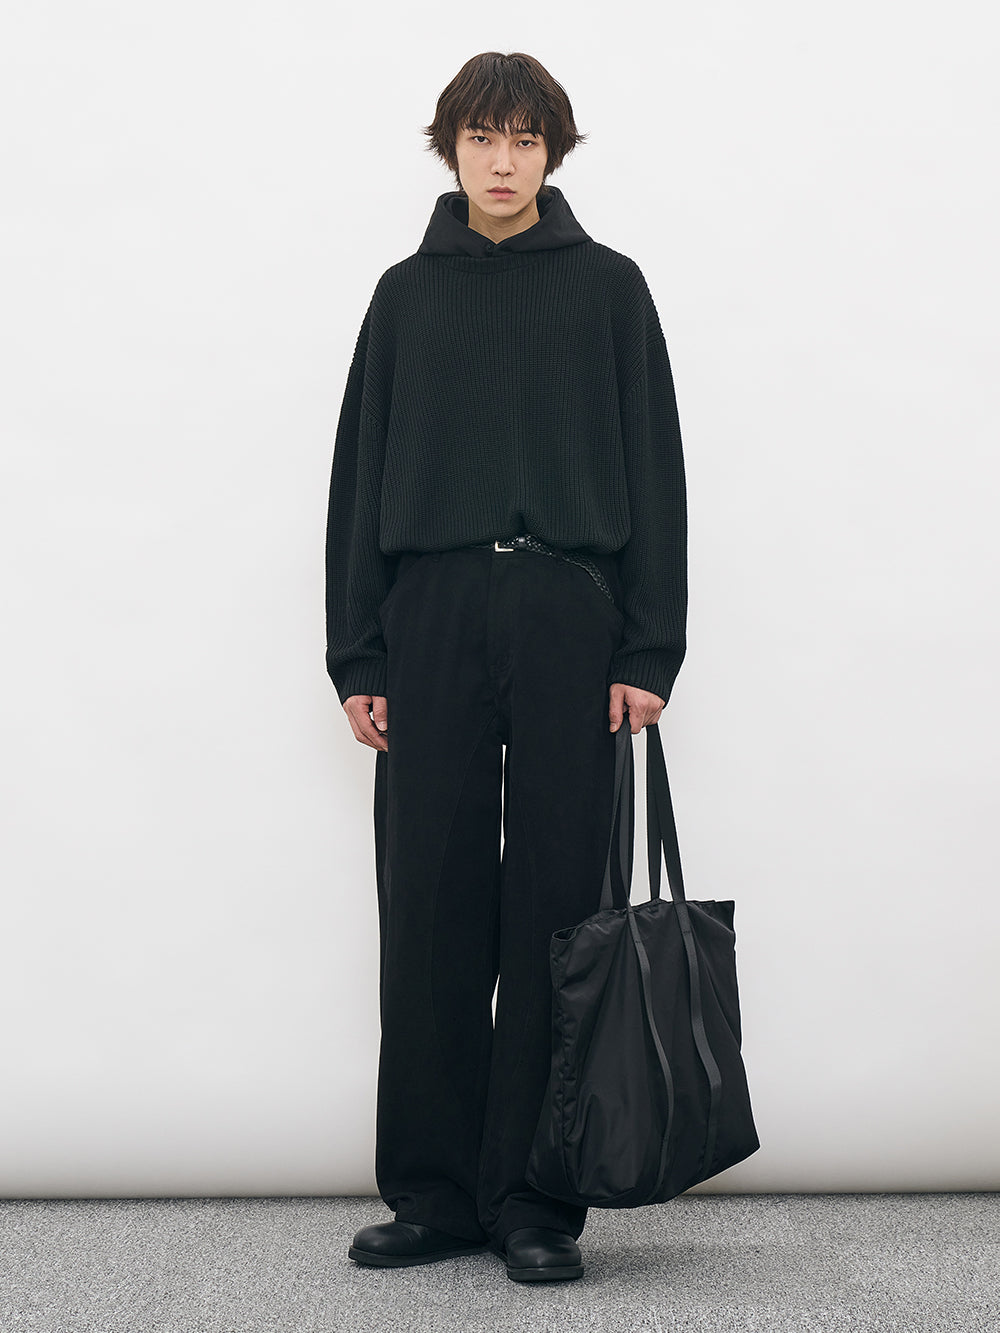 Curved Section Wide Chino Pants in Black